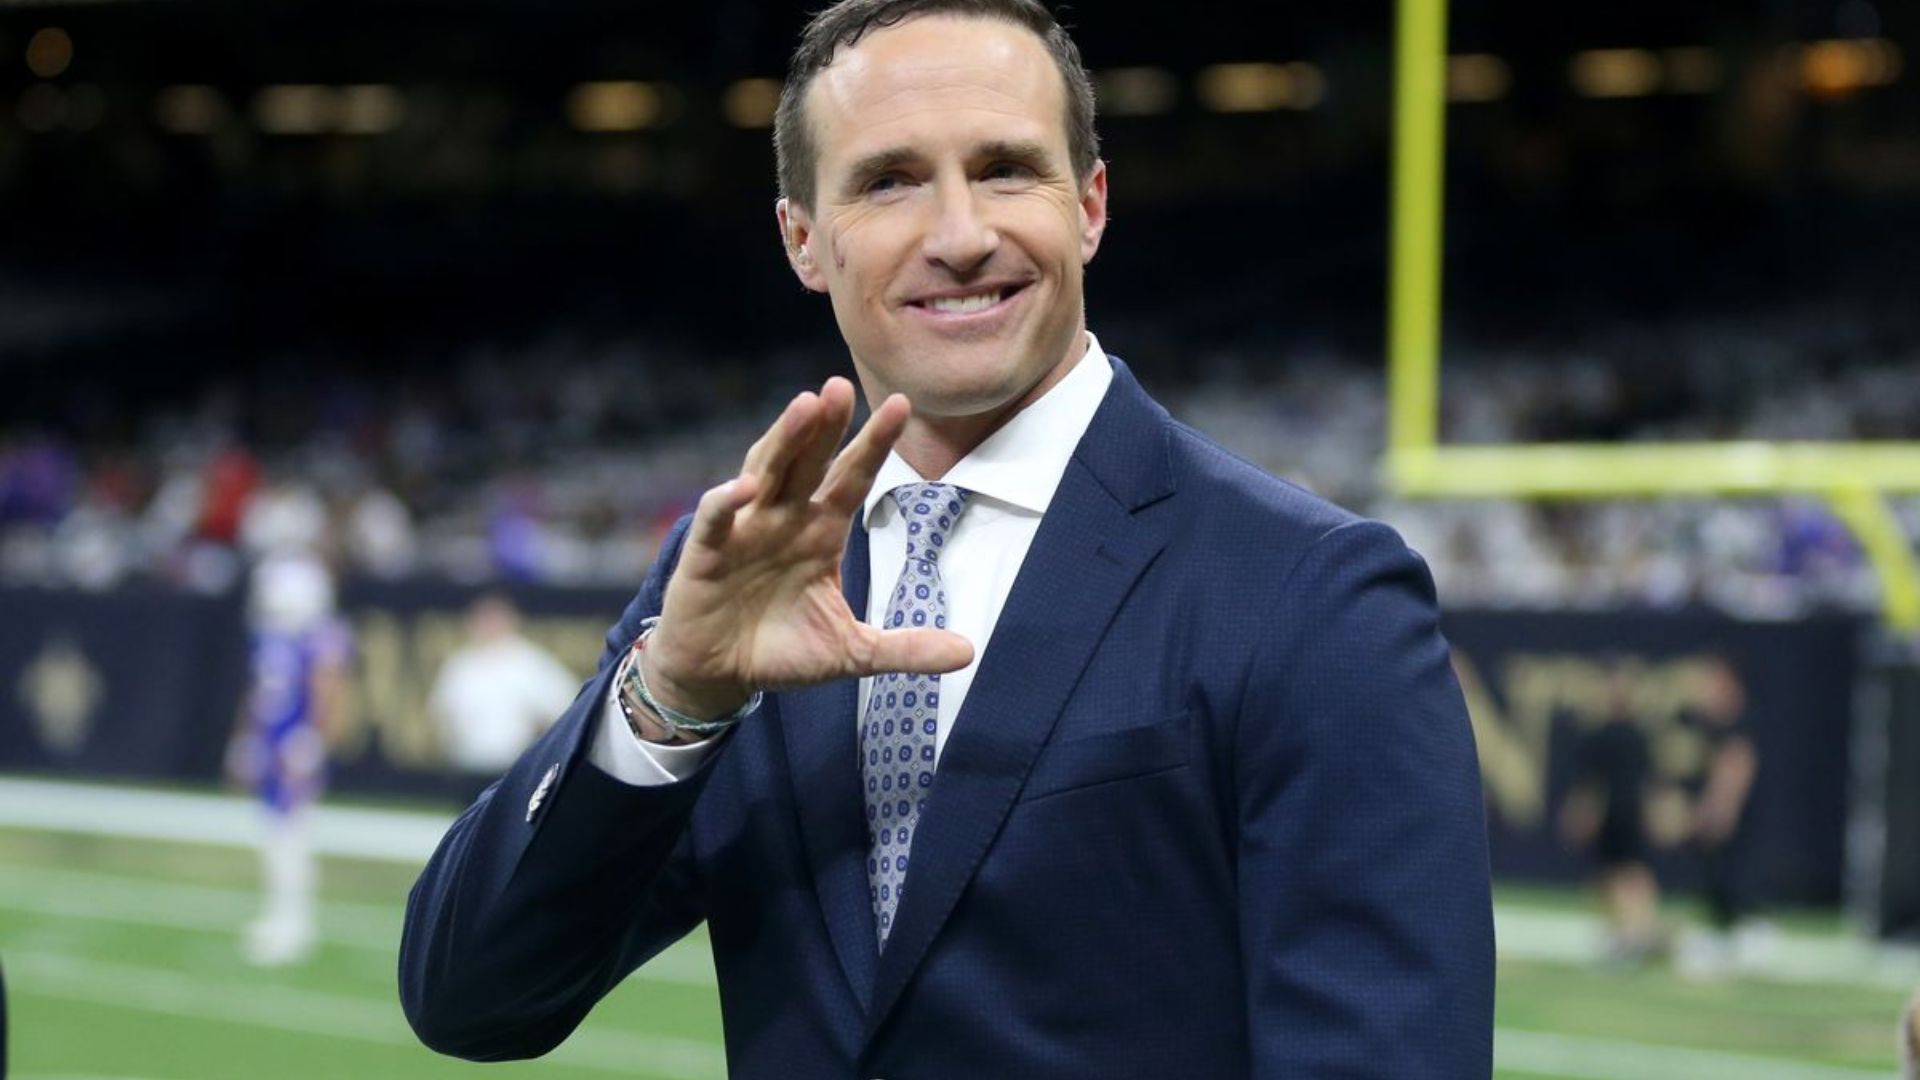 Drew Brees Doing The Hand Gesture